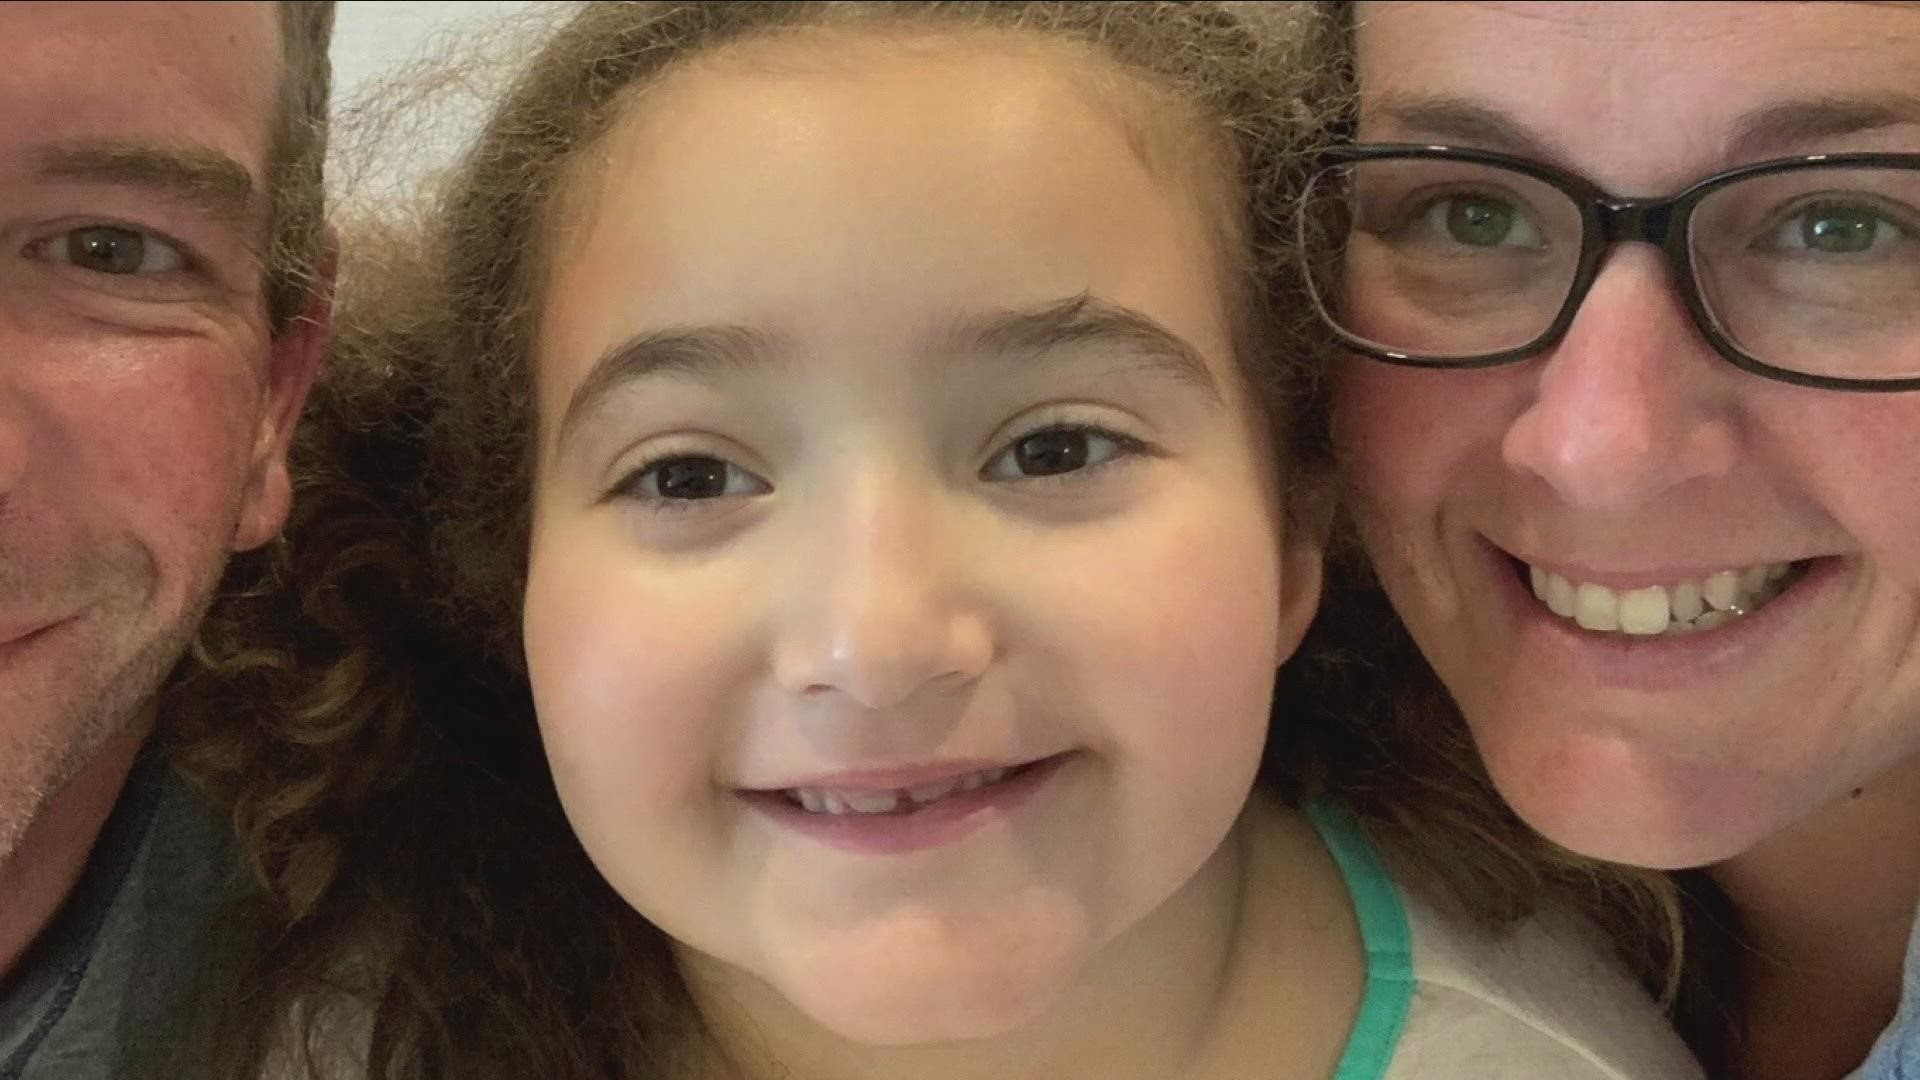 Mya was diagnosed with B-cell Acute Lymphoblastic Leukemia in 2021.